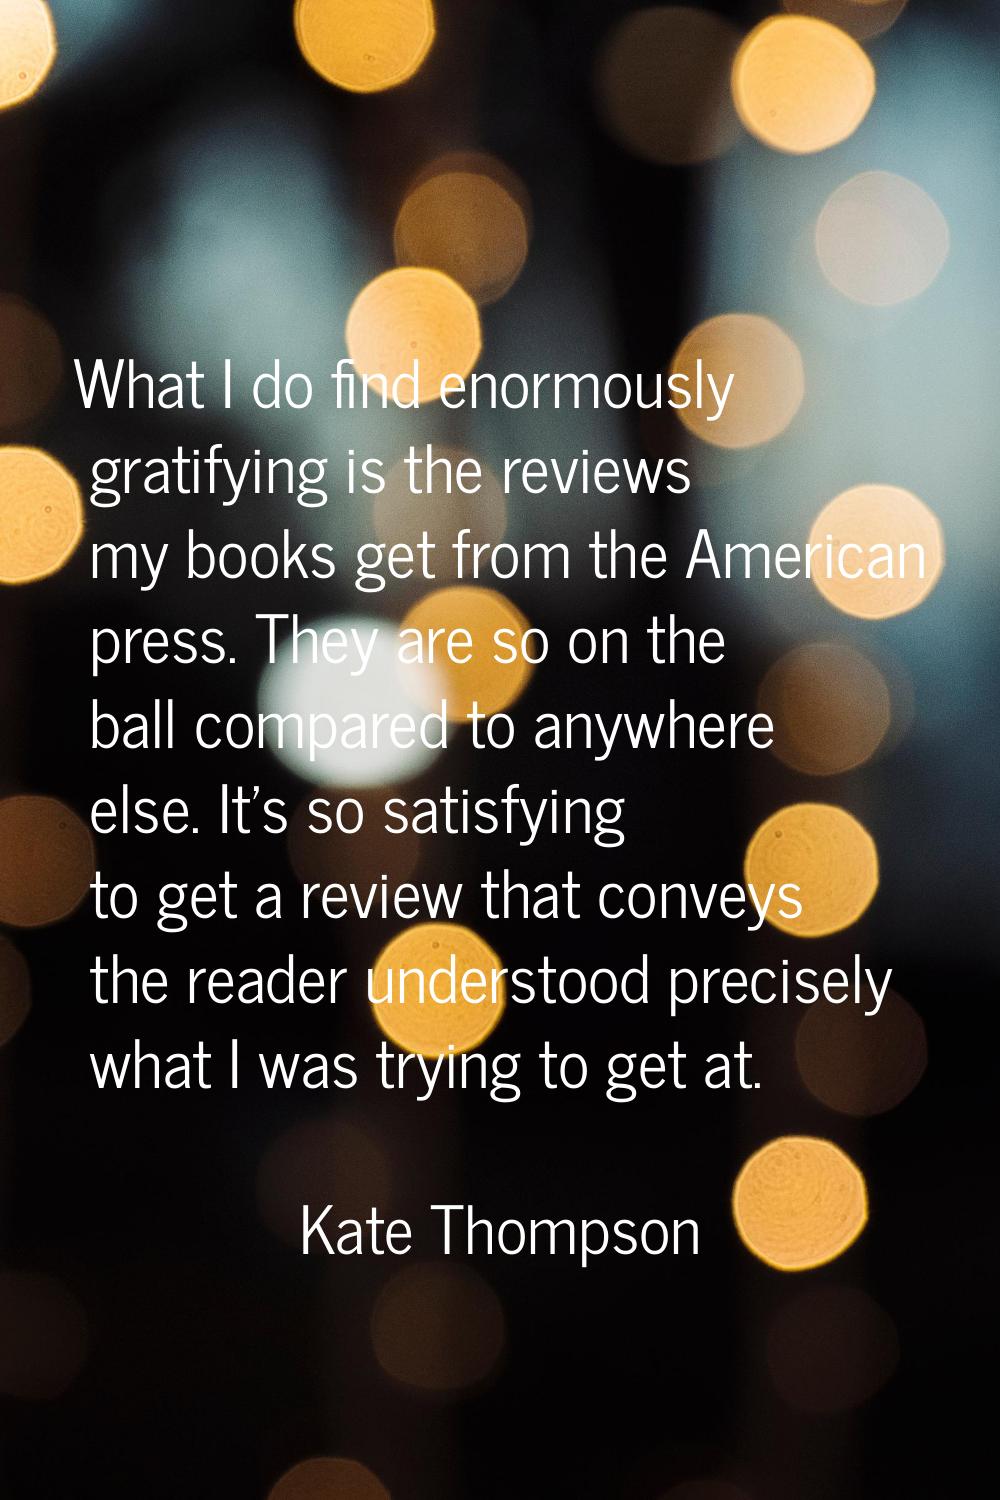 What I do find enormously gratifying is the reviews my books get from the American press. They are 